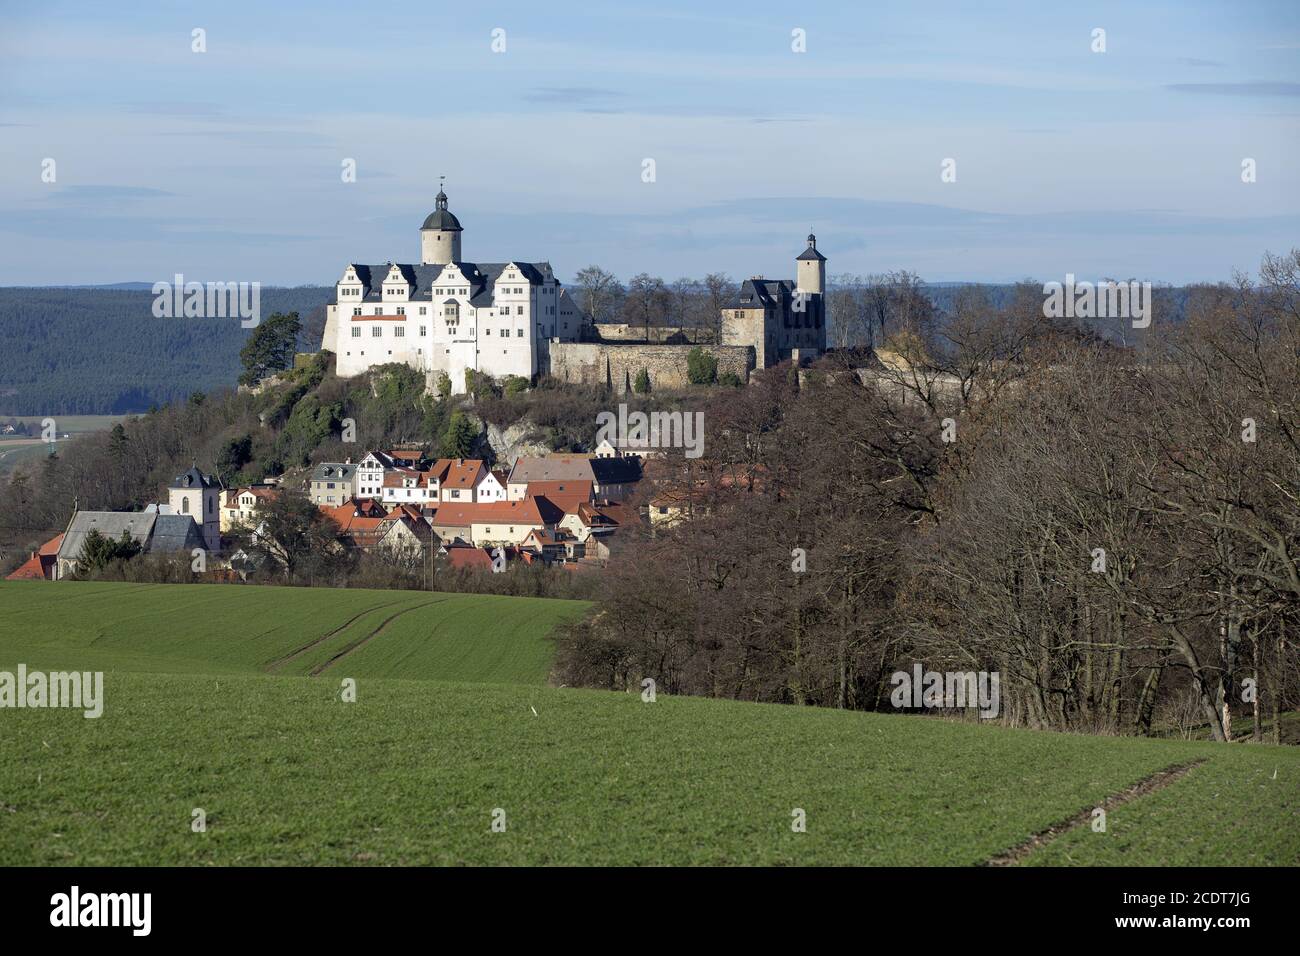 Castle Ranis and houses of the old town, Saale-Orla-Kreis, Thuringia, Germany, Europe Stock Photo